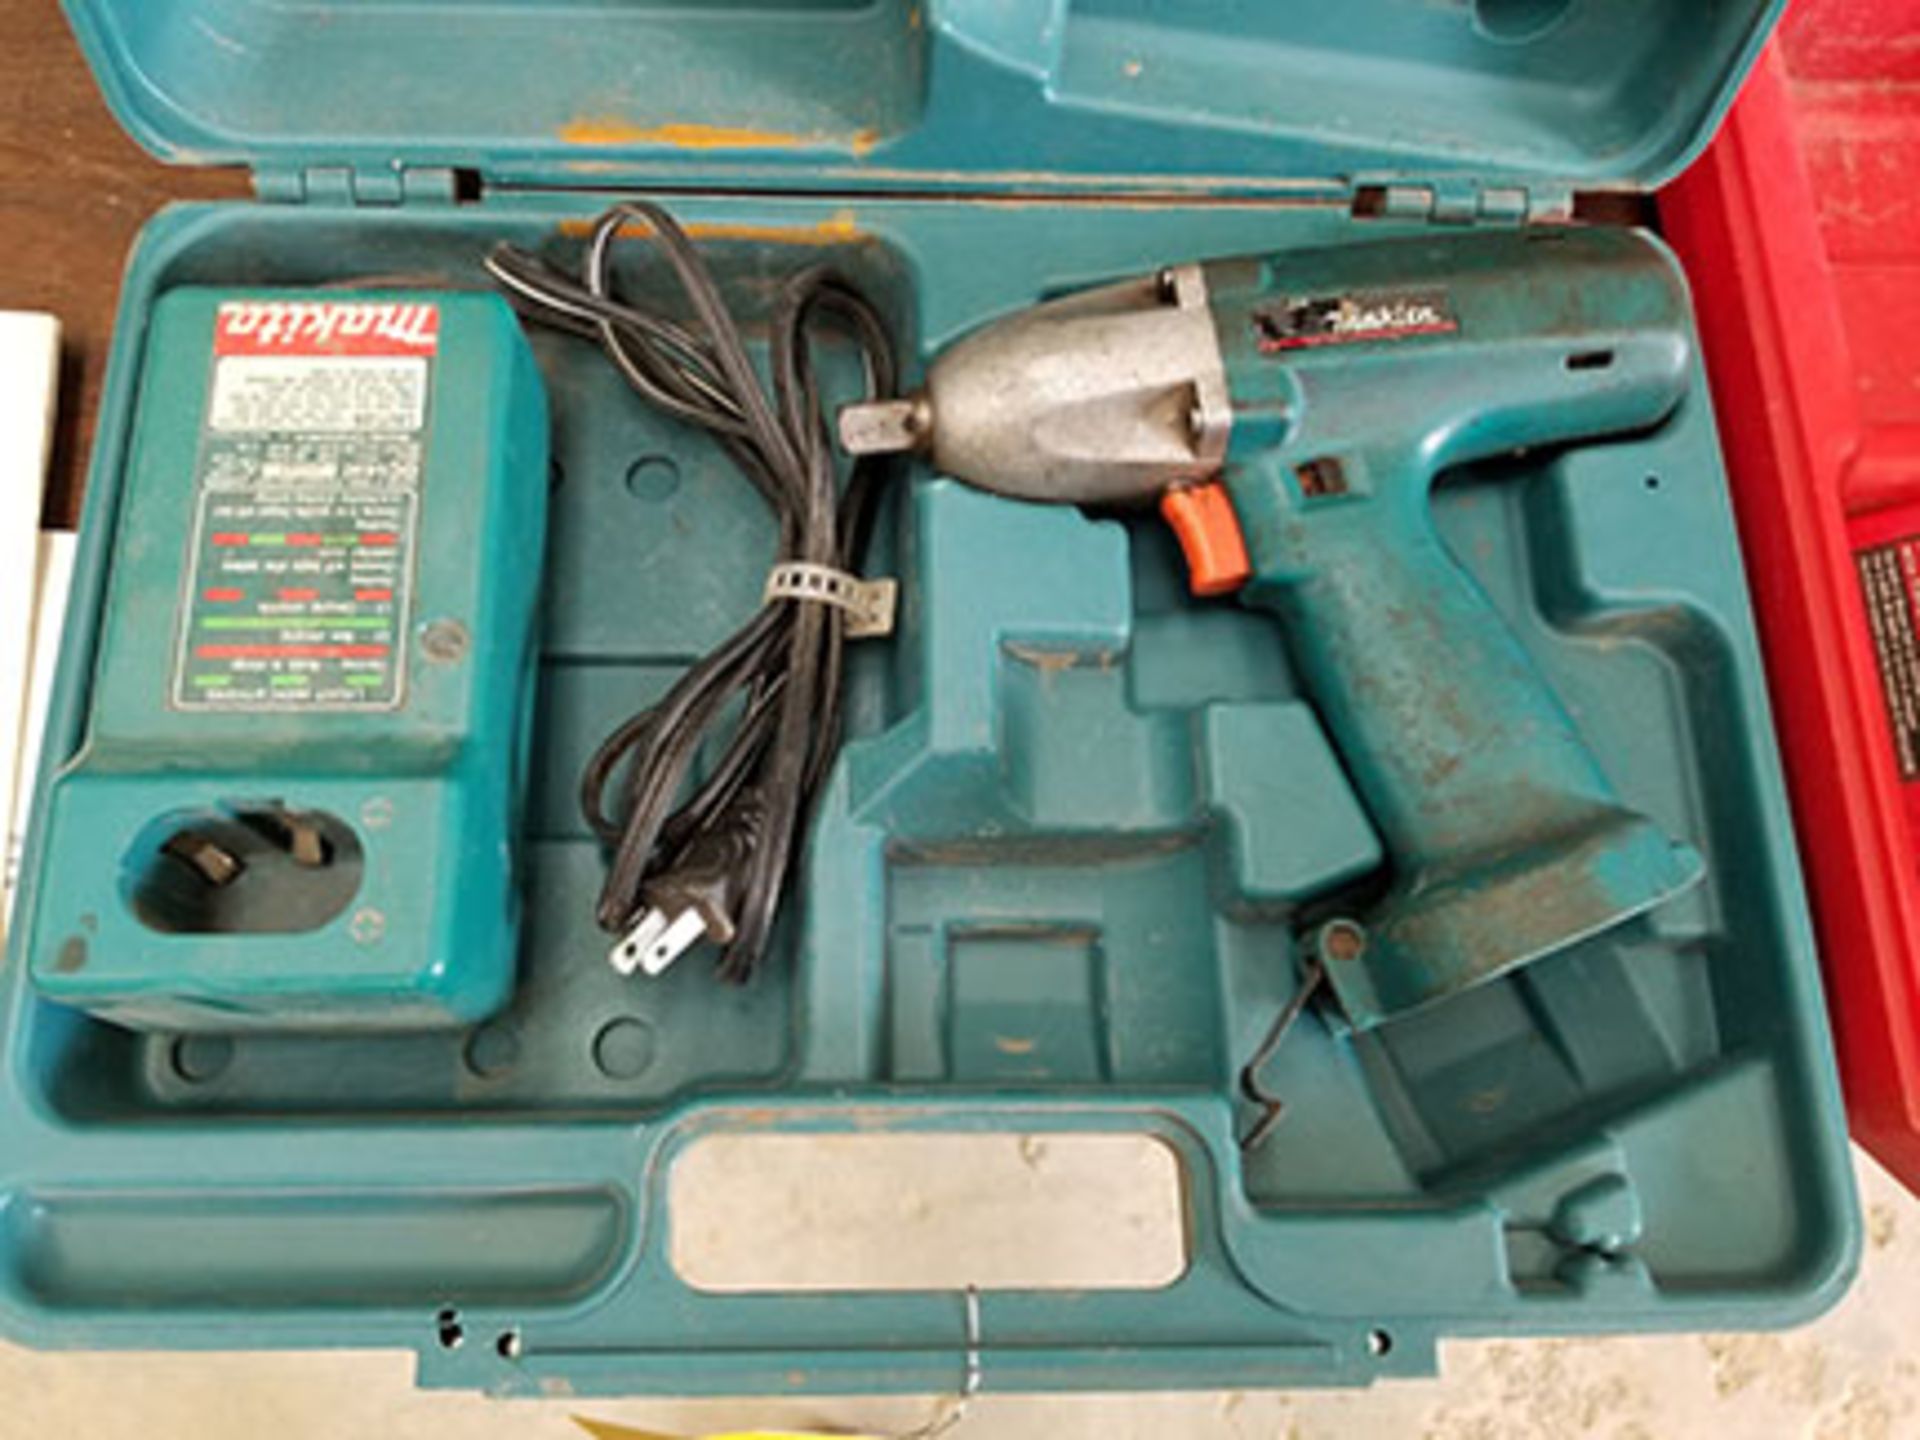 MAKITA AND MILWAUKEE CORDLESS IMPACT WRENCHES, 1/2’’ DRIVE, NO BATTERIES, 12-18V - Image 4 of 6